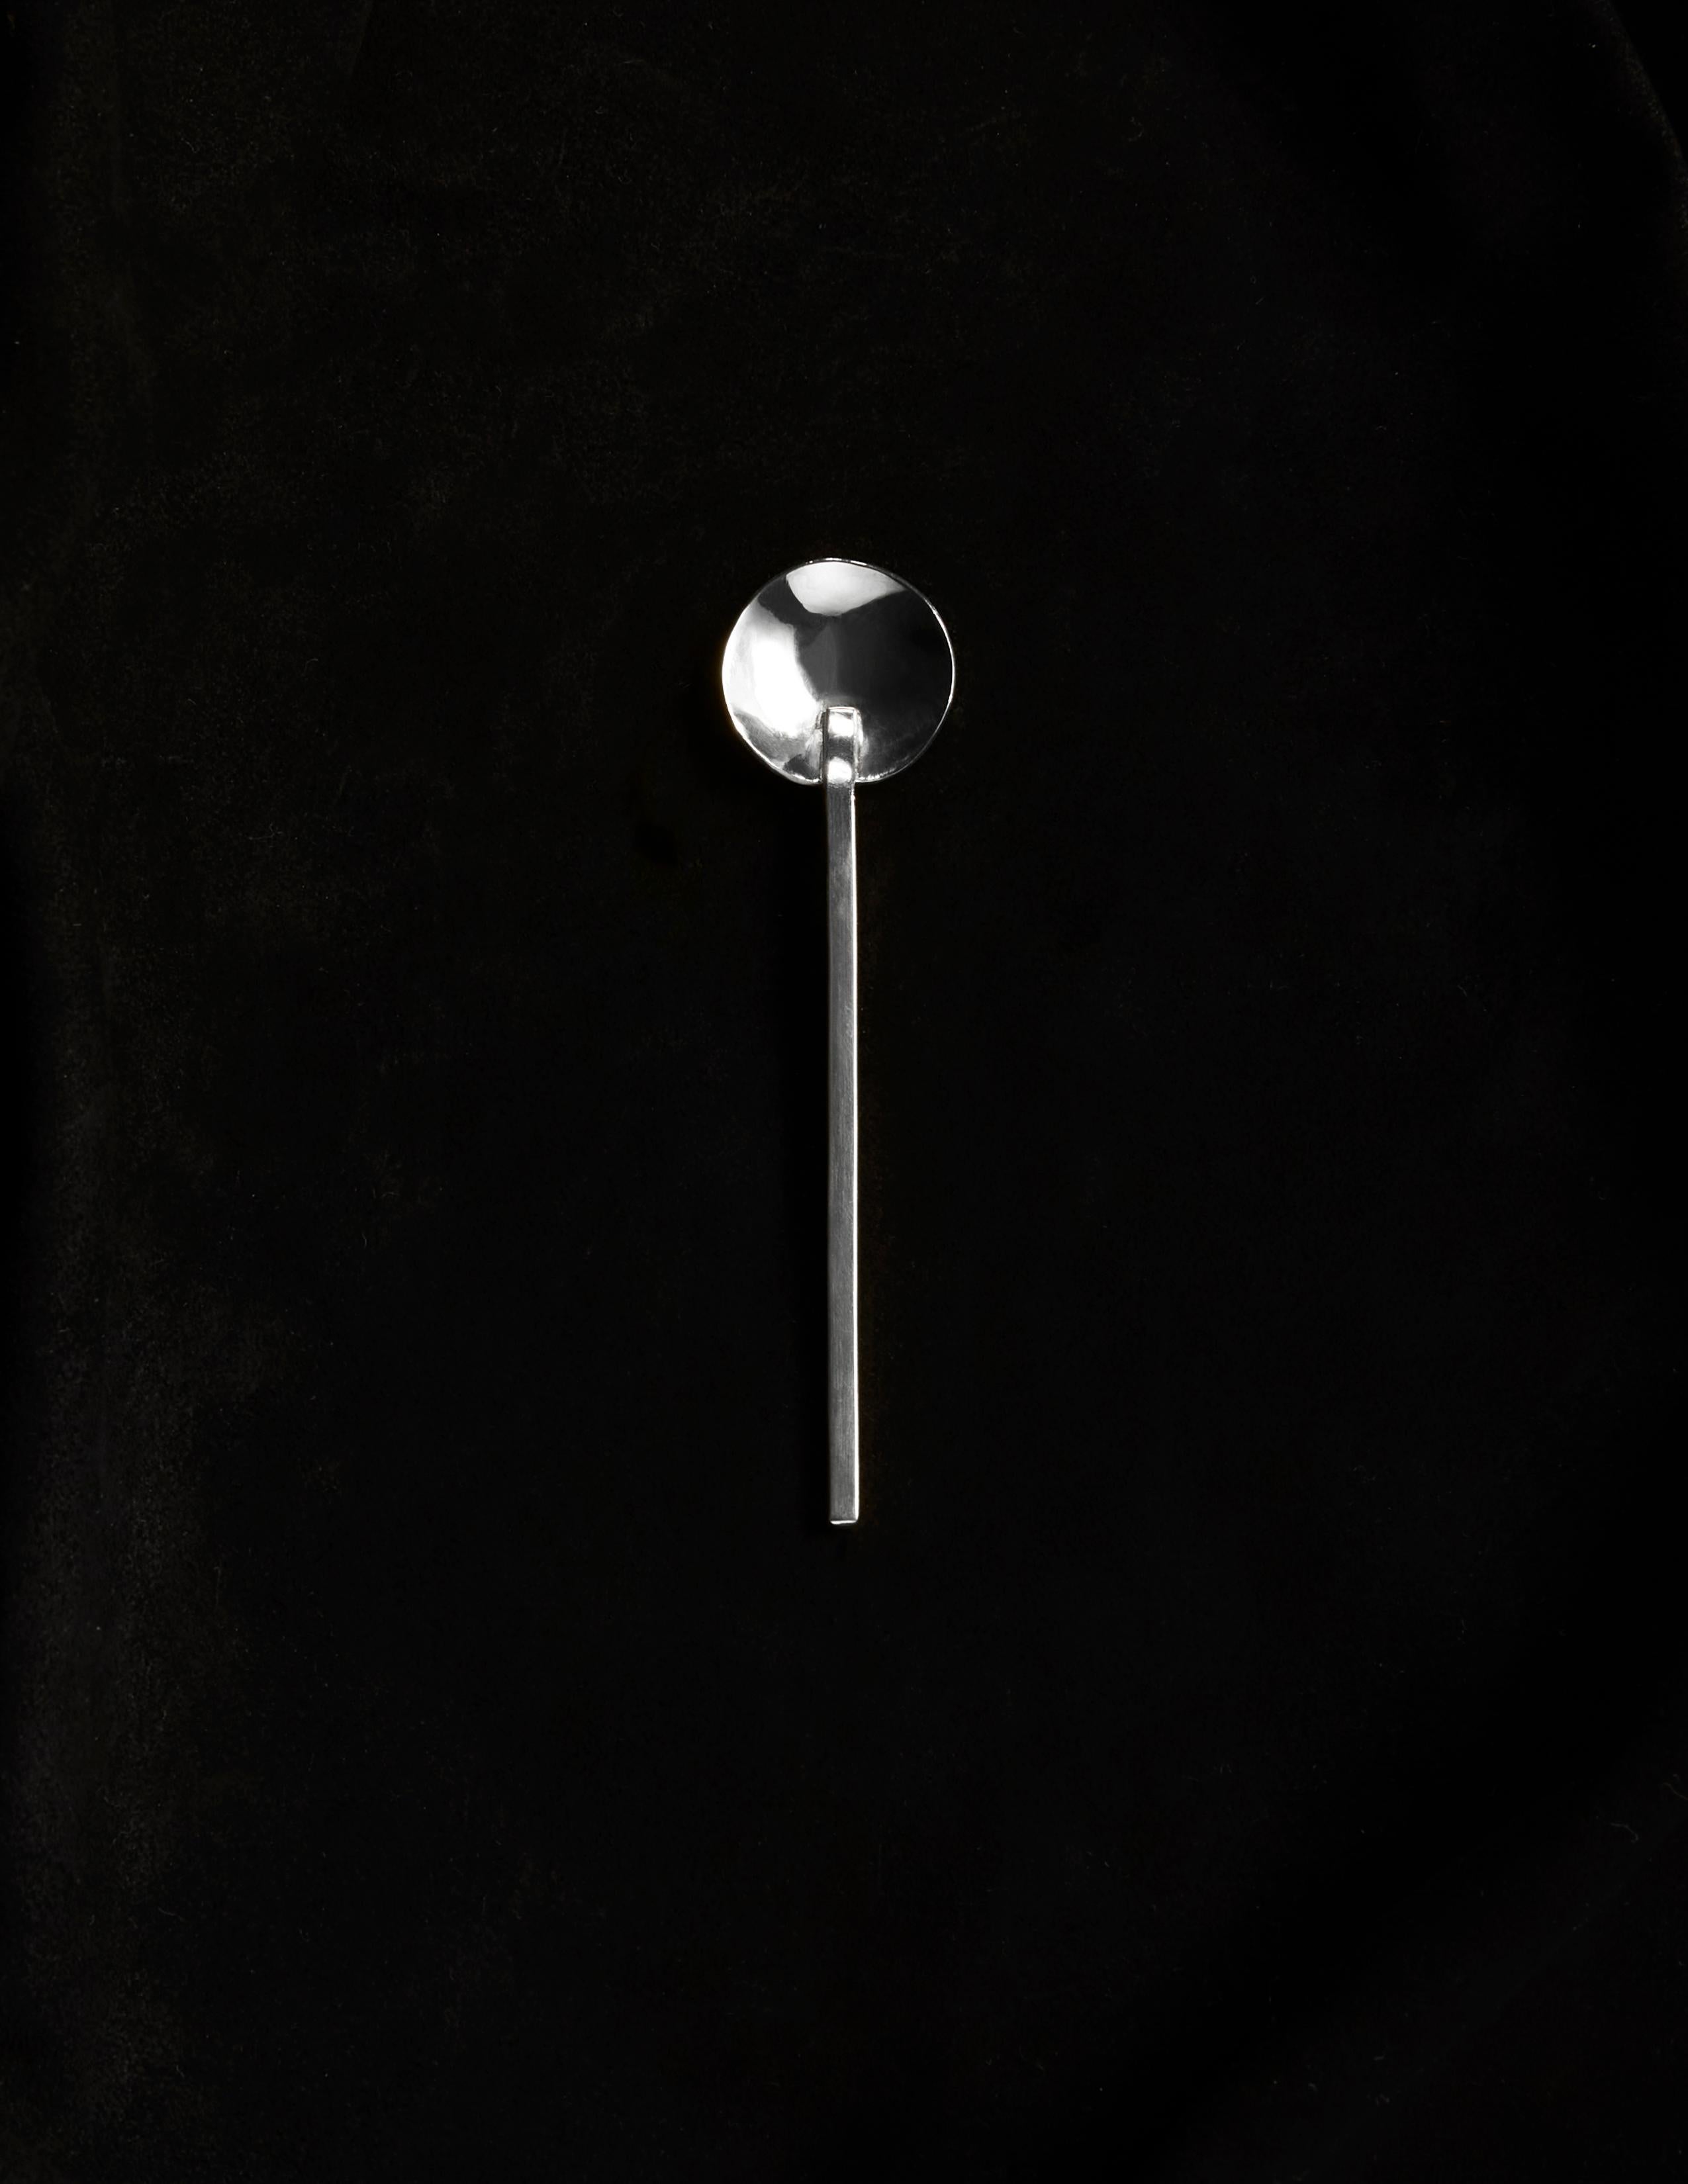 An espresso spoon for the modern coffee connoisseur - crafted with passion and precision by Heath Wagoner of HW. Studio in Brooklyn.

Made with high-polish sterling silver, this espresso spoon is not only beautiful to look at but also durable and